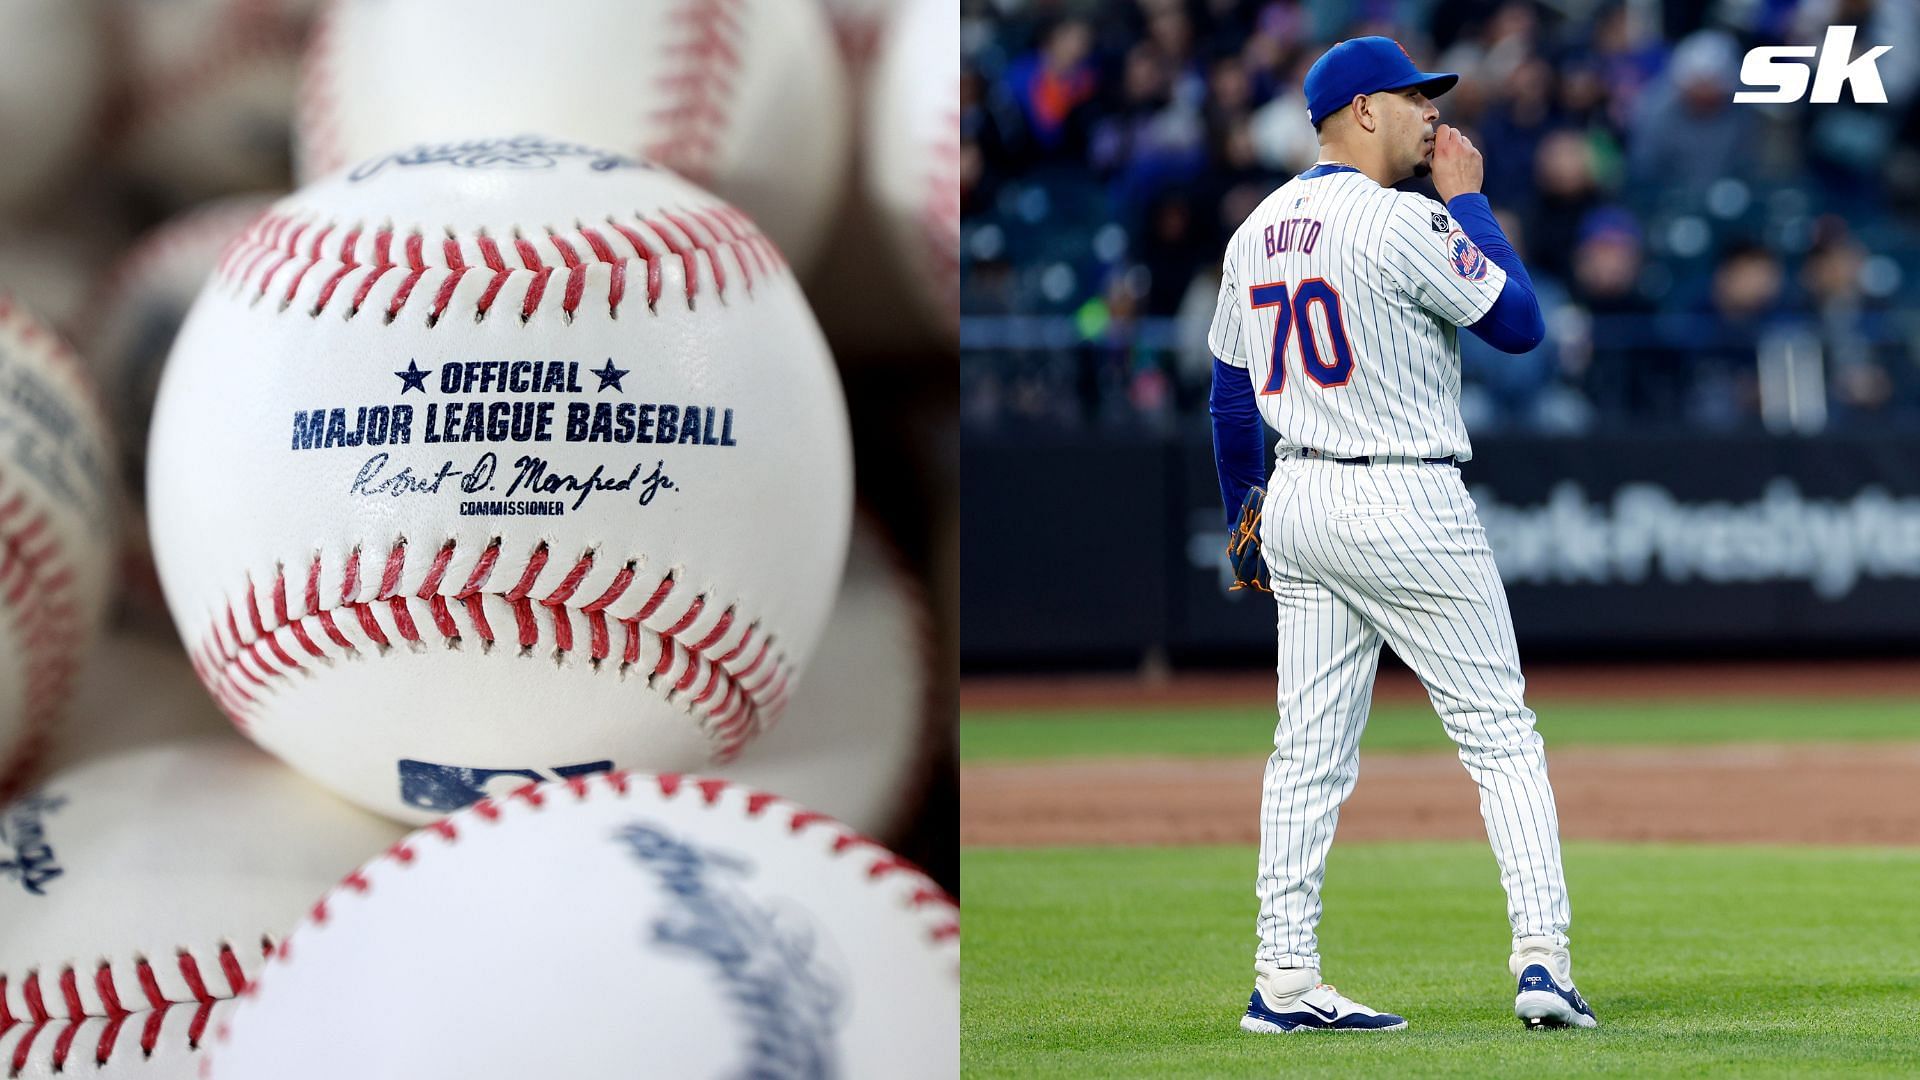 Mets showcase local pride with NYC-printed baseballs &amp; bases for City Connect games